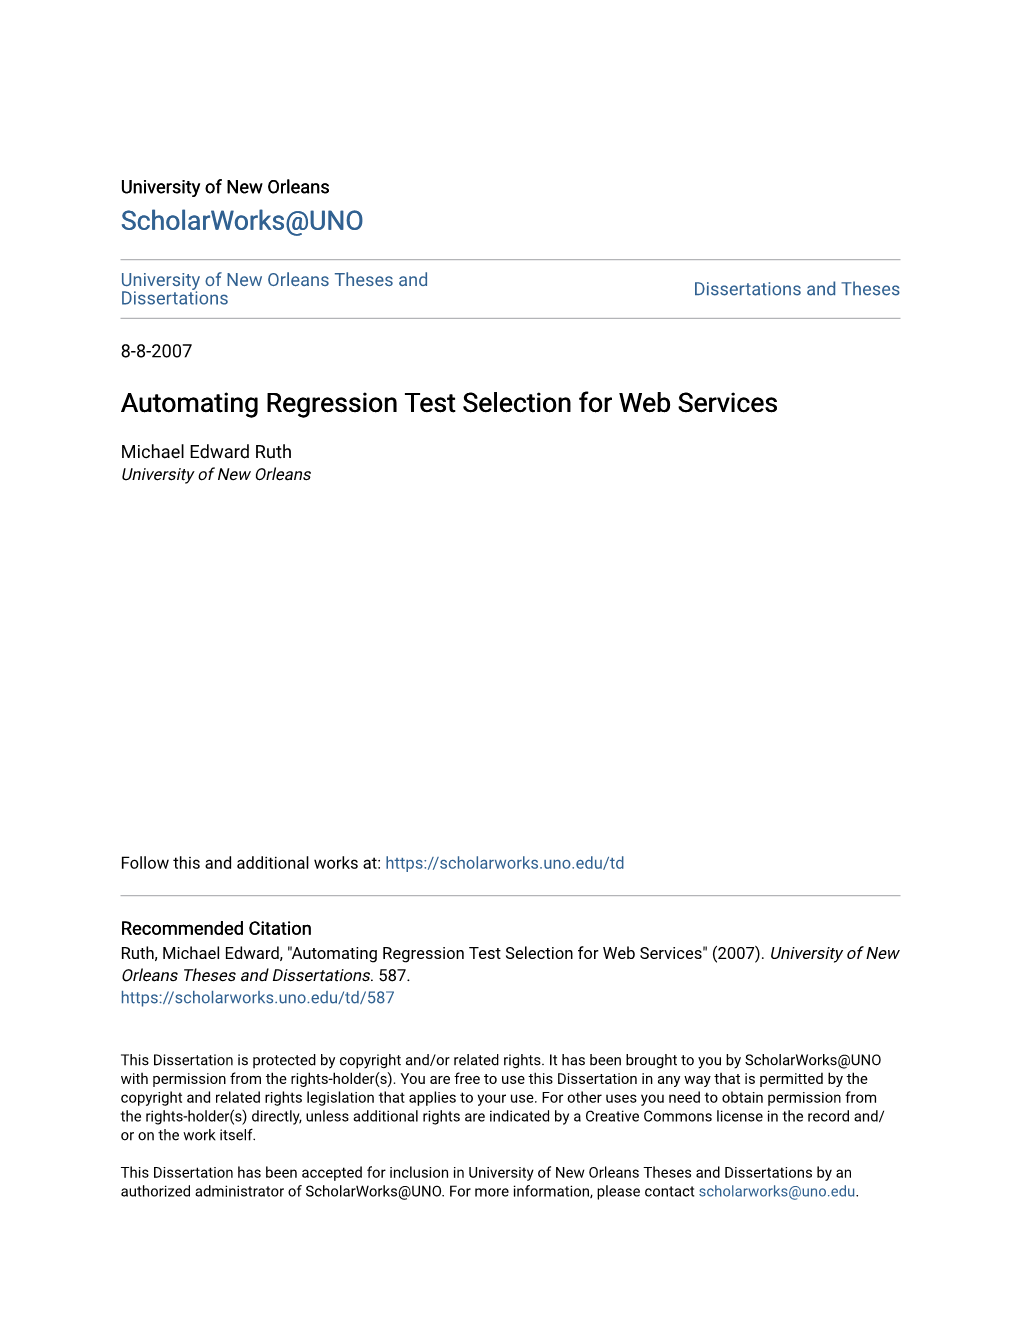 Automating Regression Test Selection for Web Services